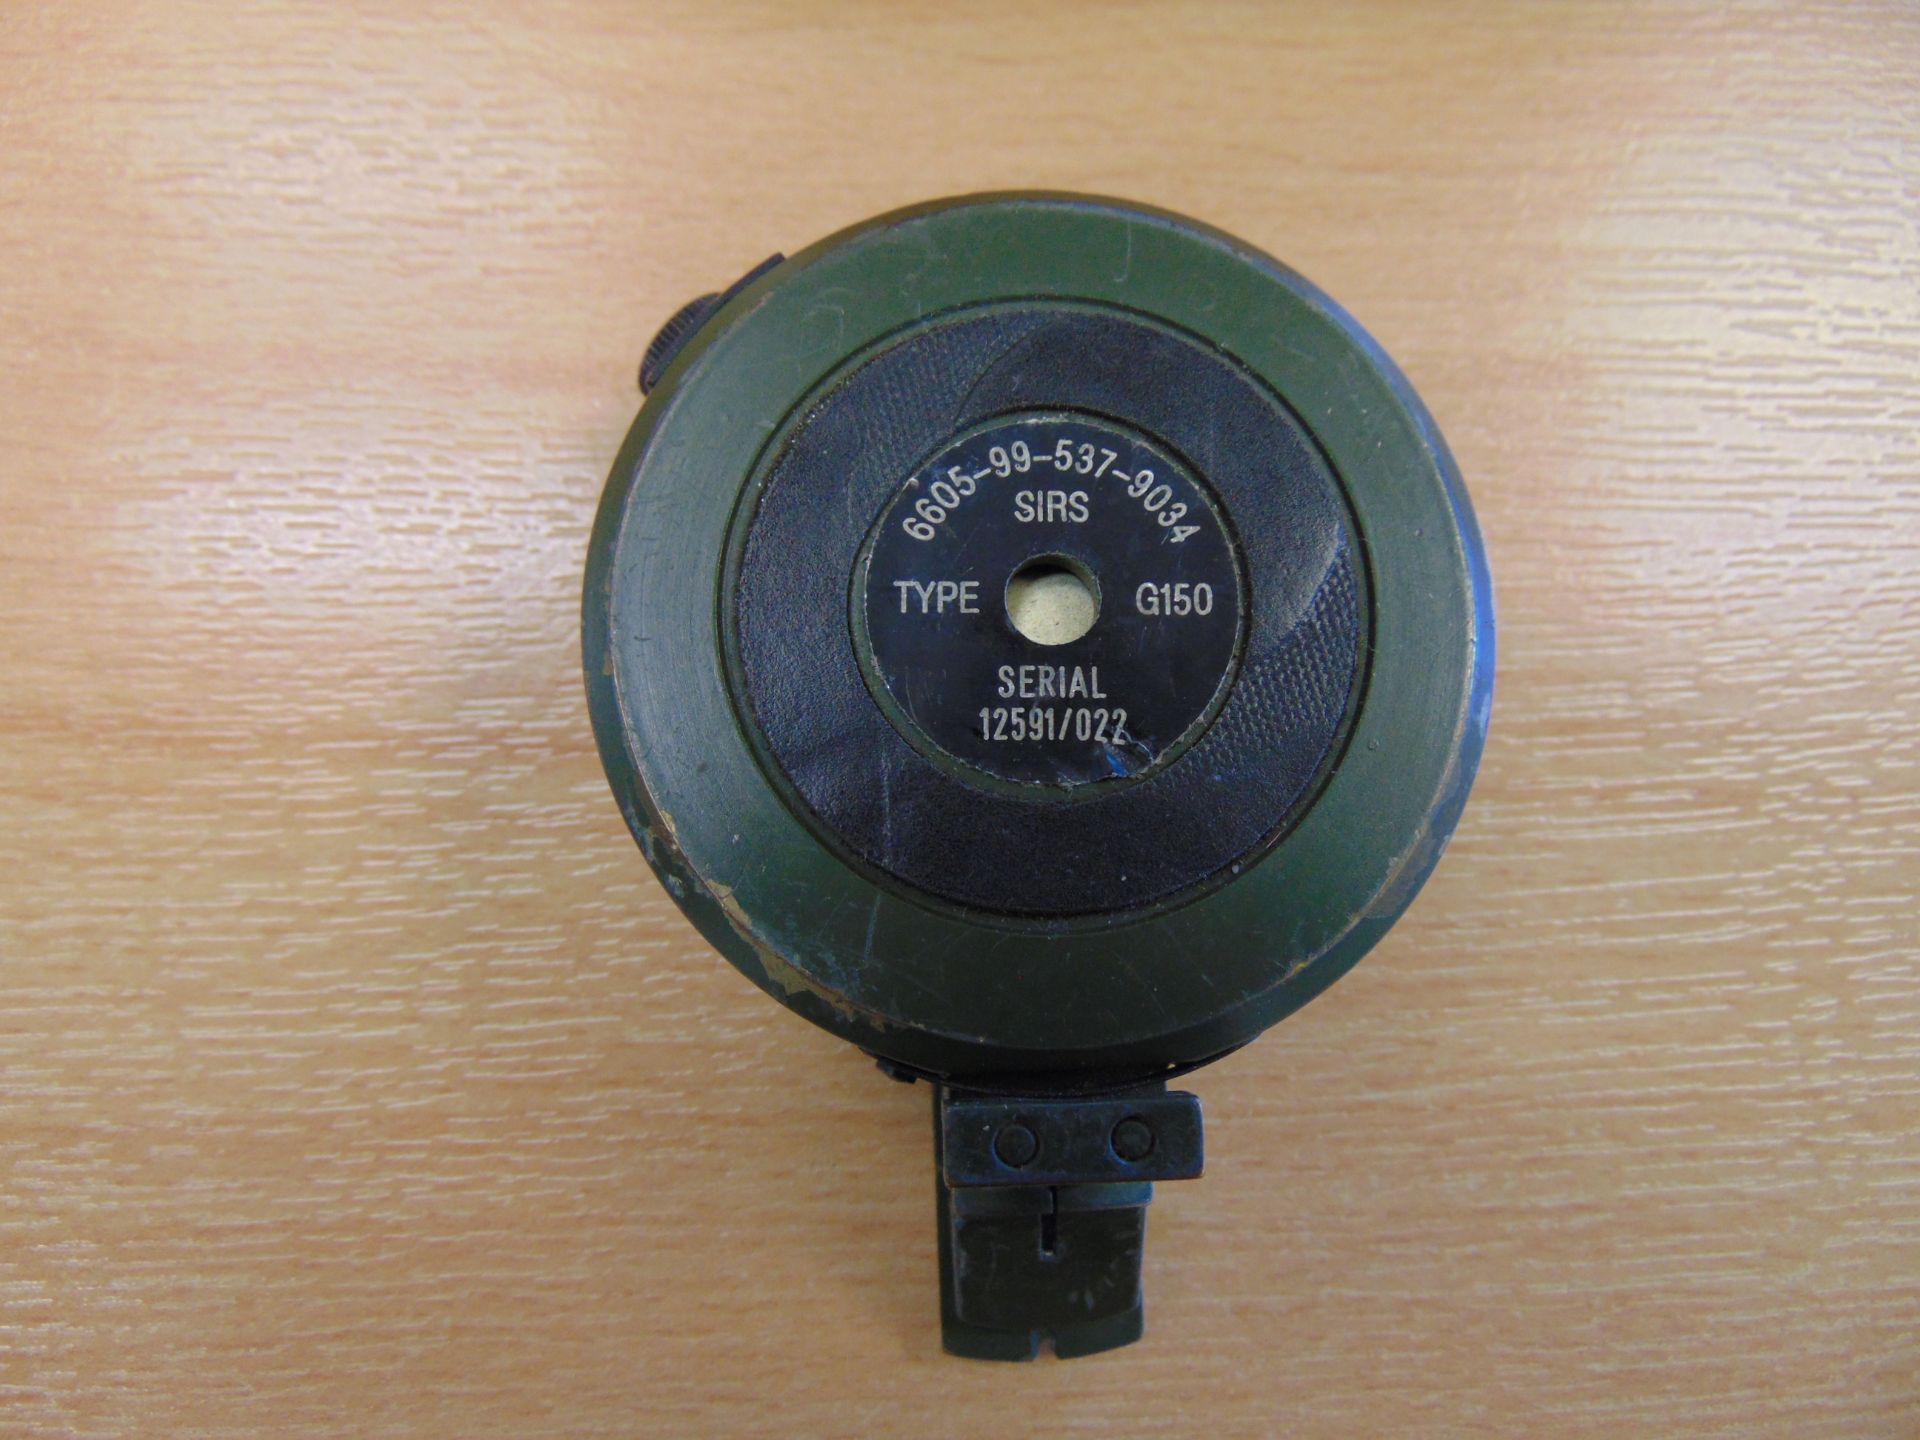 12 x Stanley London & SIRS British Army Prismatic Compass - Image 5 of 5